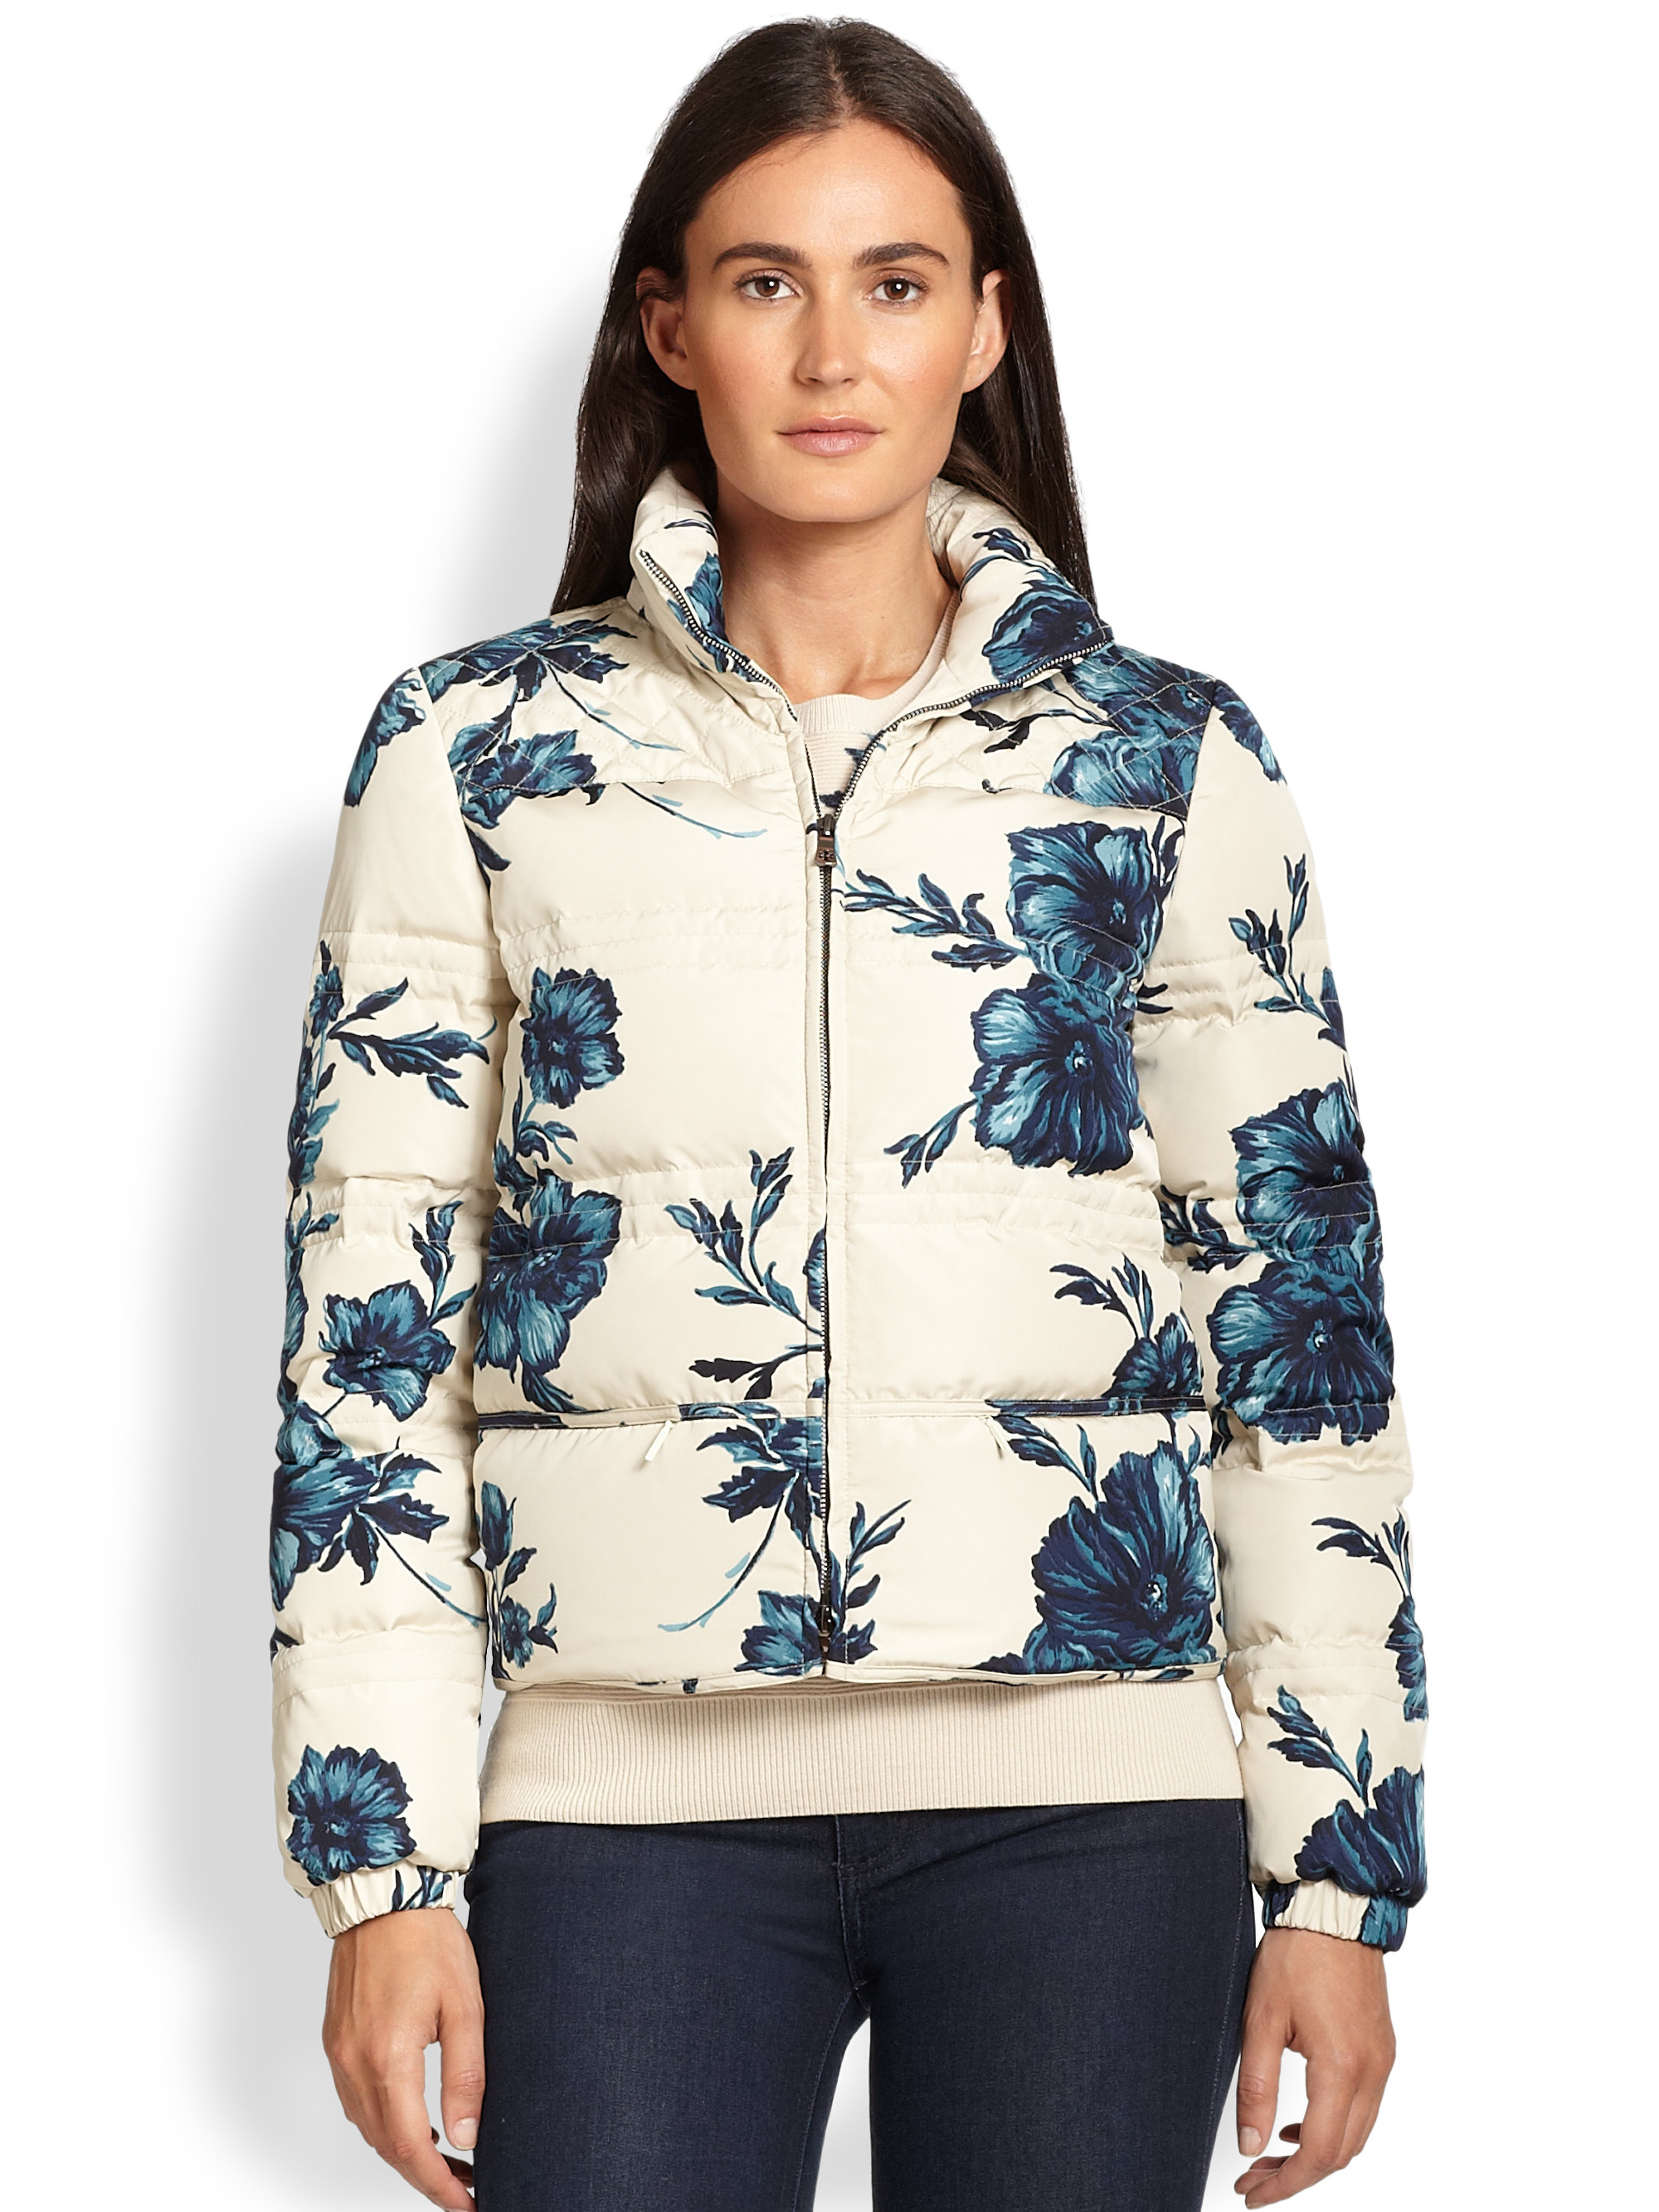 Lyst - Tory Burch Ronda Floral Puffer Jacket in Natural